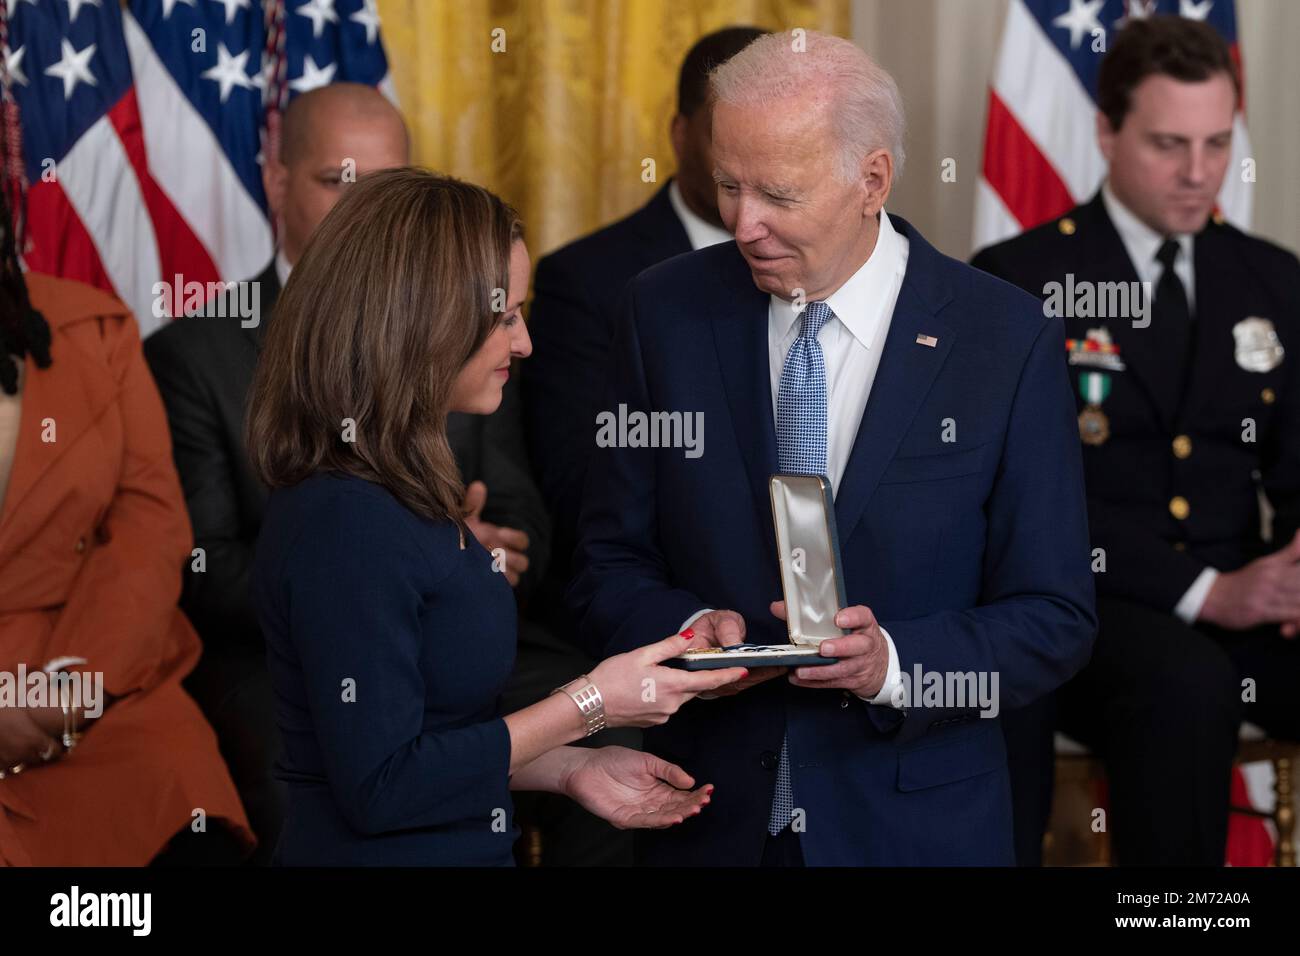 United States President Joe Biden presents the the Presidential Citizens Medal to Michigan Secretary of State Jocelyn Benson during a ceremony marking the the two-year anniversary of the January 6th insurrection at the White House in Washington, DC, Friday, January 6, 2023. Biden awarded the Presidential Citizens Medal to Capitol Police Officer Eugene Goodman, Former Washington, DC police Officer Michael Fanone, Capitol Police Officer Caroline Edwards, Capitol Police Officer Brian Sicknick (posthumously), Election Workers Shaye Moss and her mother Ruby Freeman, Arizona House speaker Rusty Bowe Stock Photo